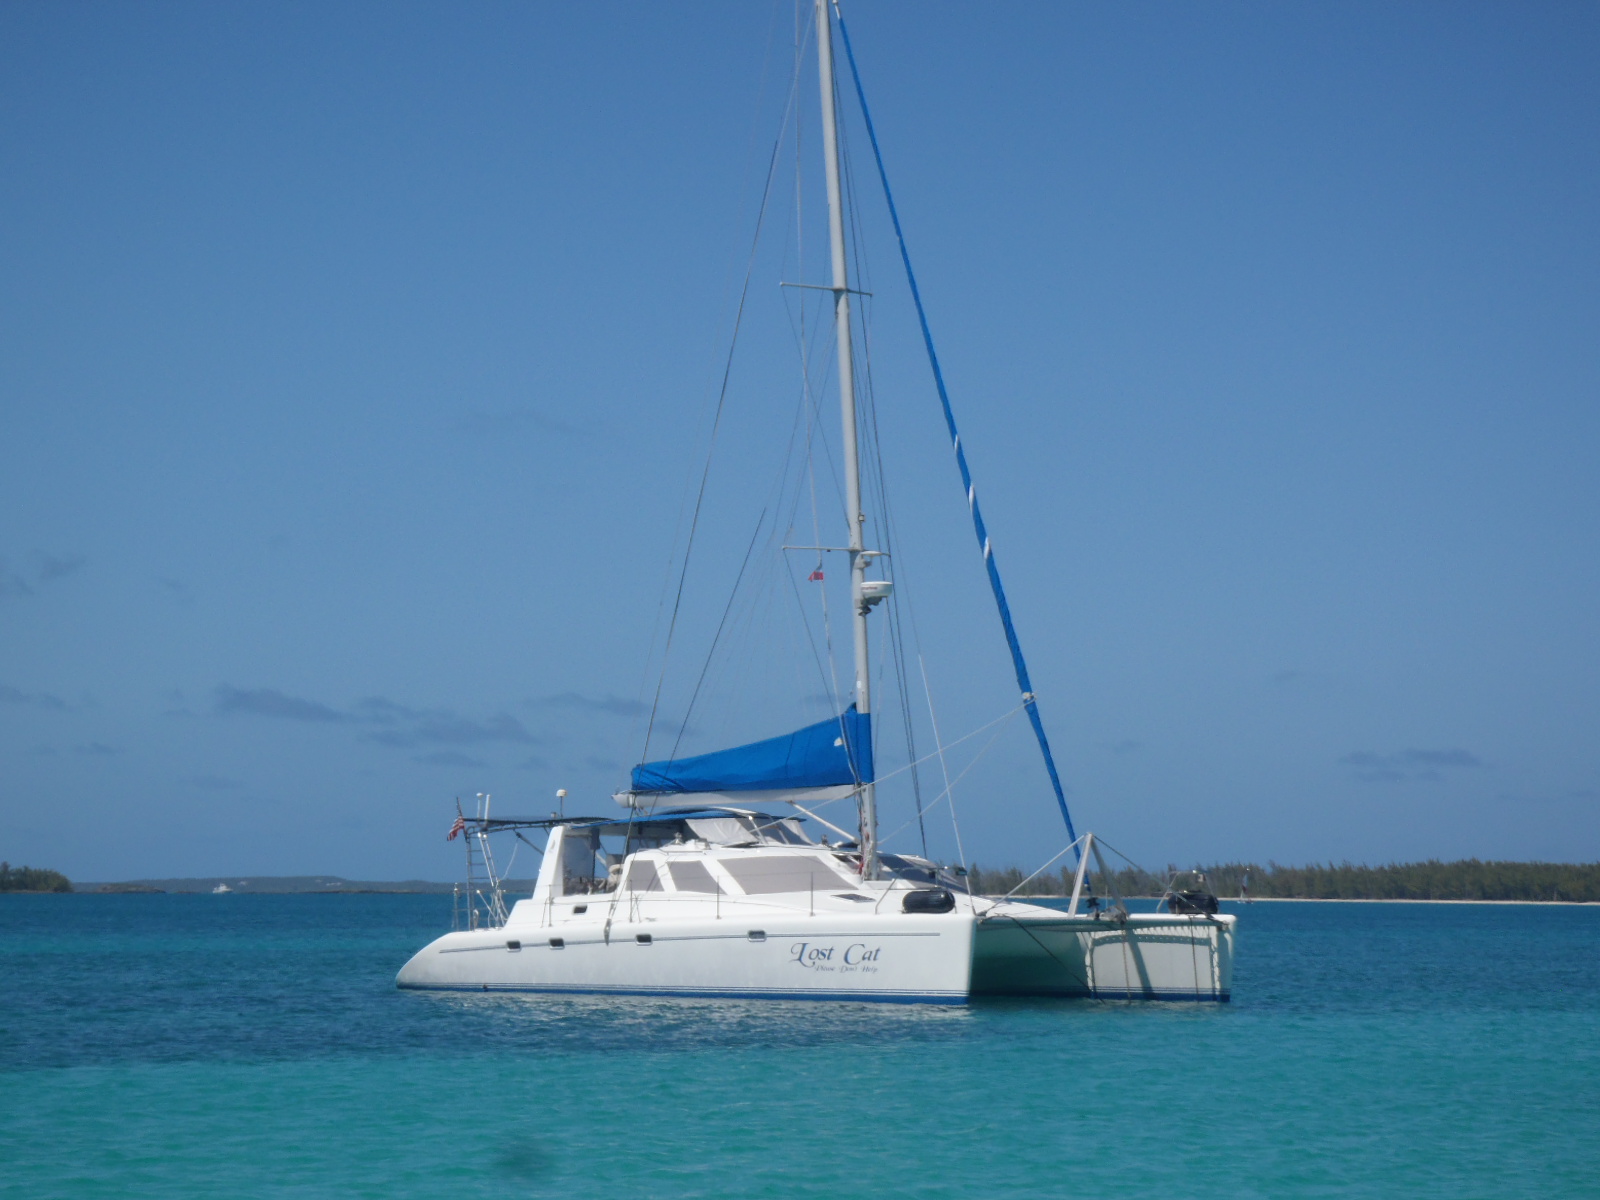 17July Latest Listings Price Cuts this Week on Catamarans